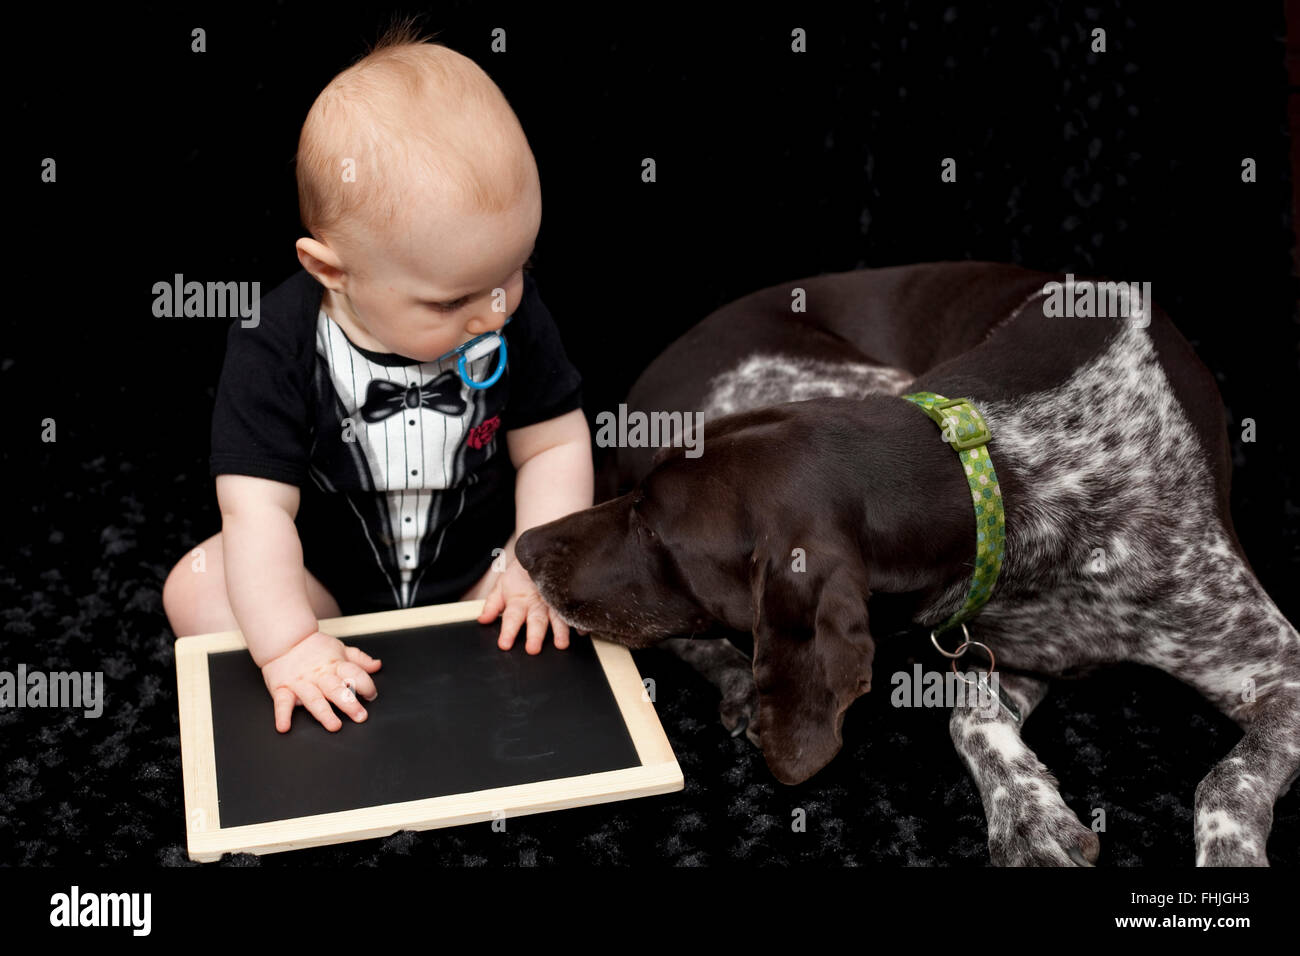 Baby boy and his GSP dog in a photo studio Stock Photo